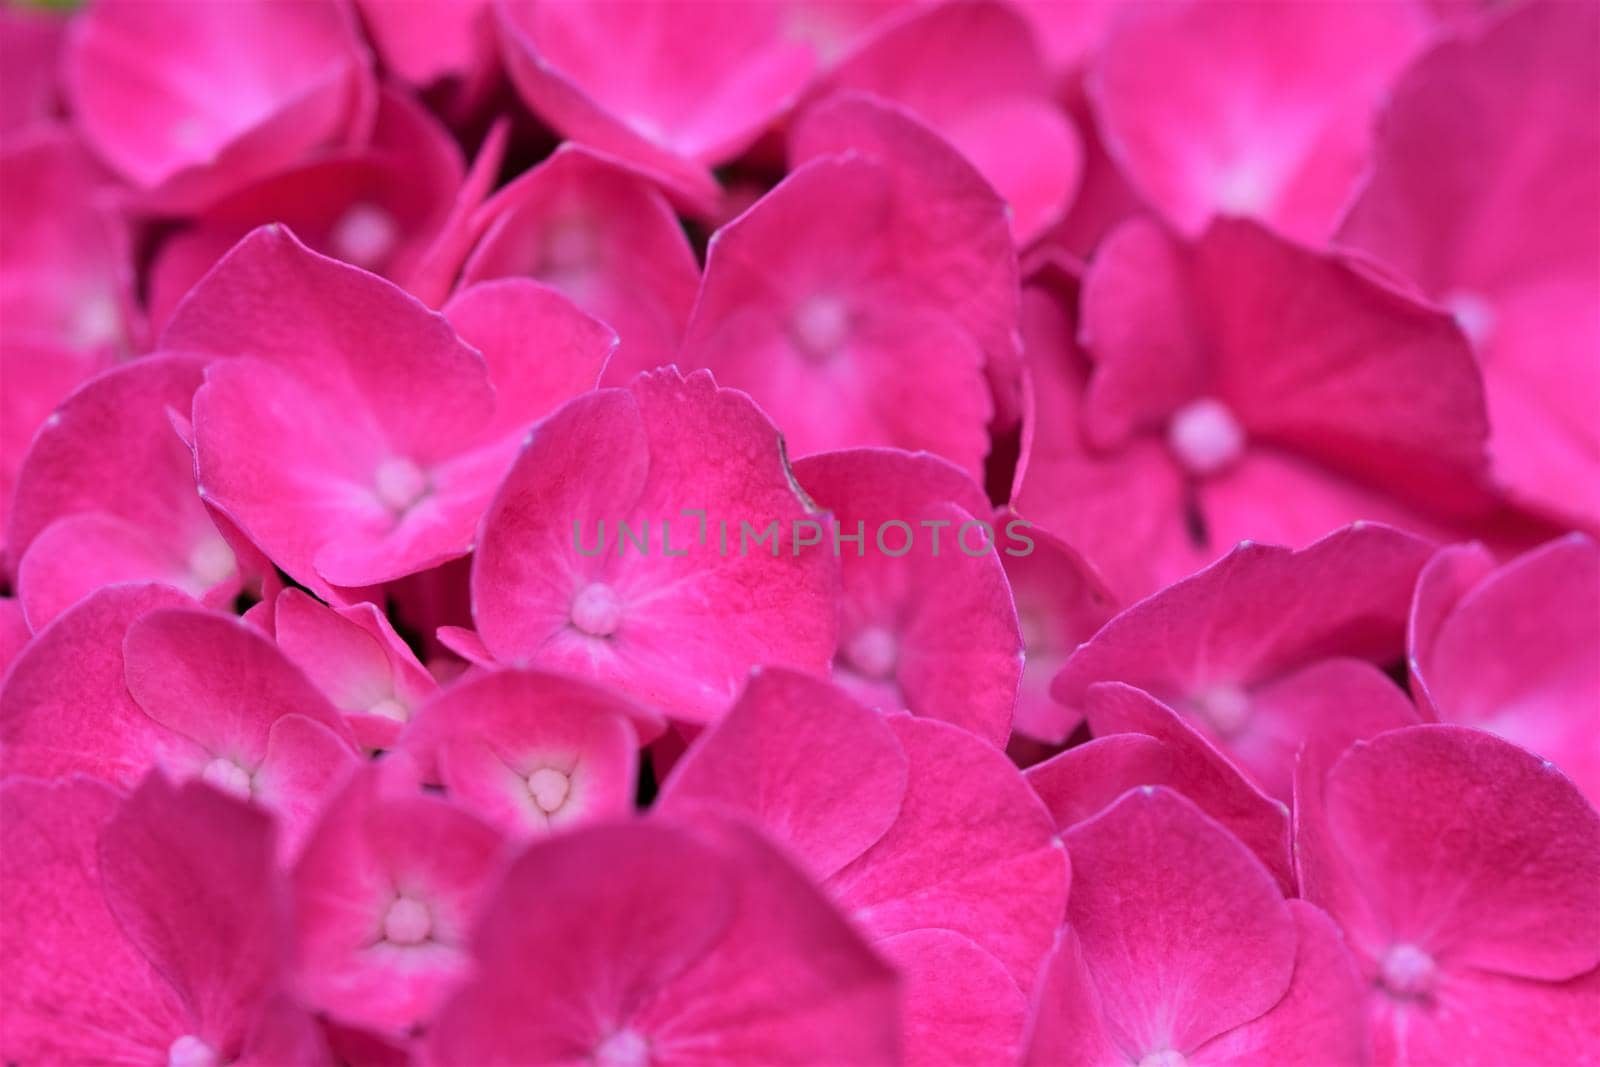 A pink hydrangea blossom as a close up by Luise123